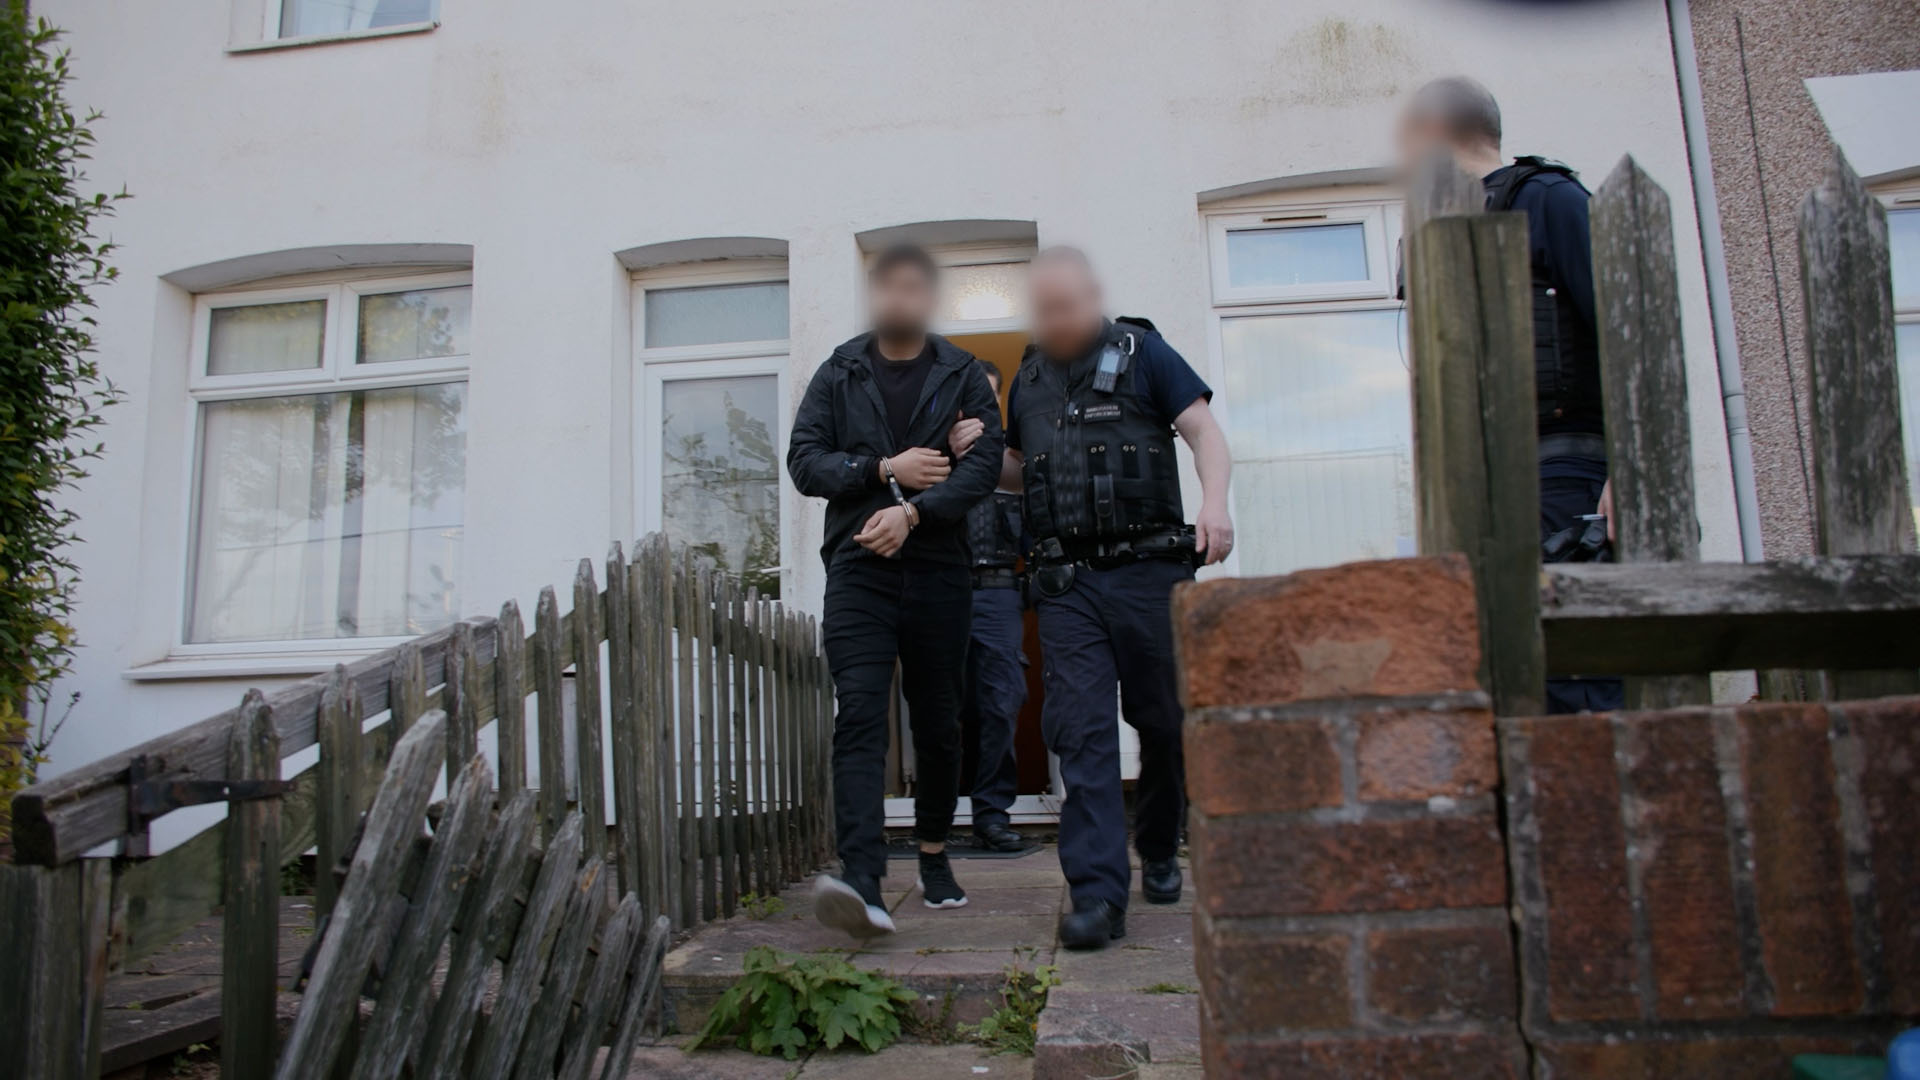 The Home Office has disclosed few details of the raids